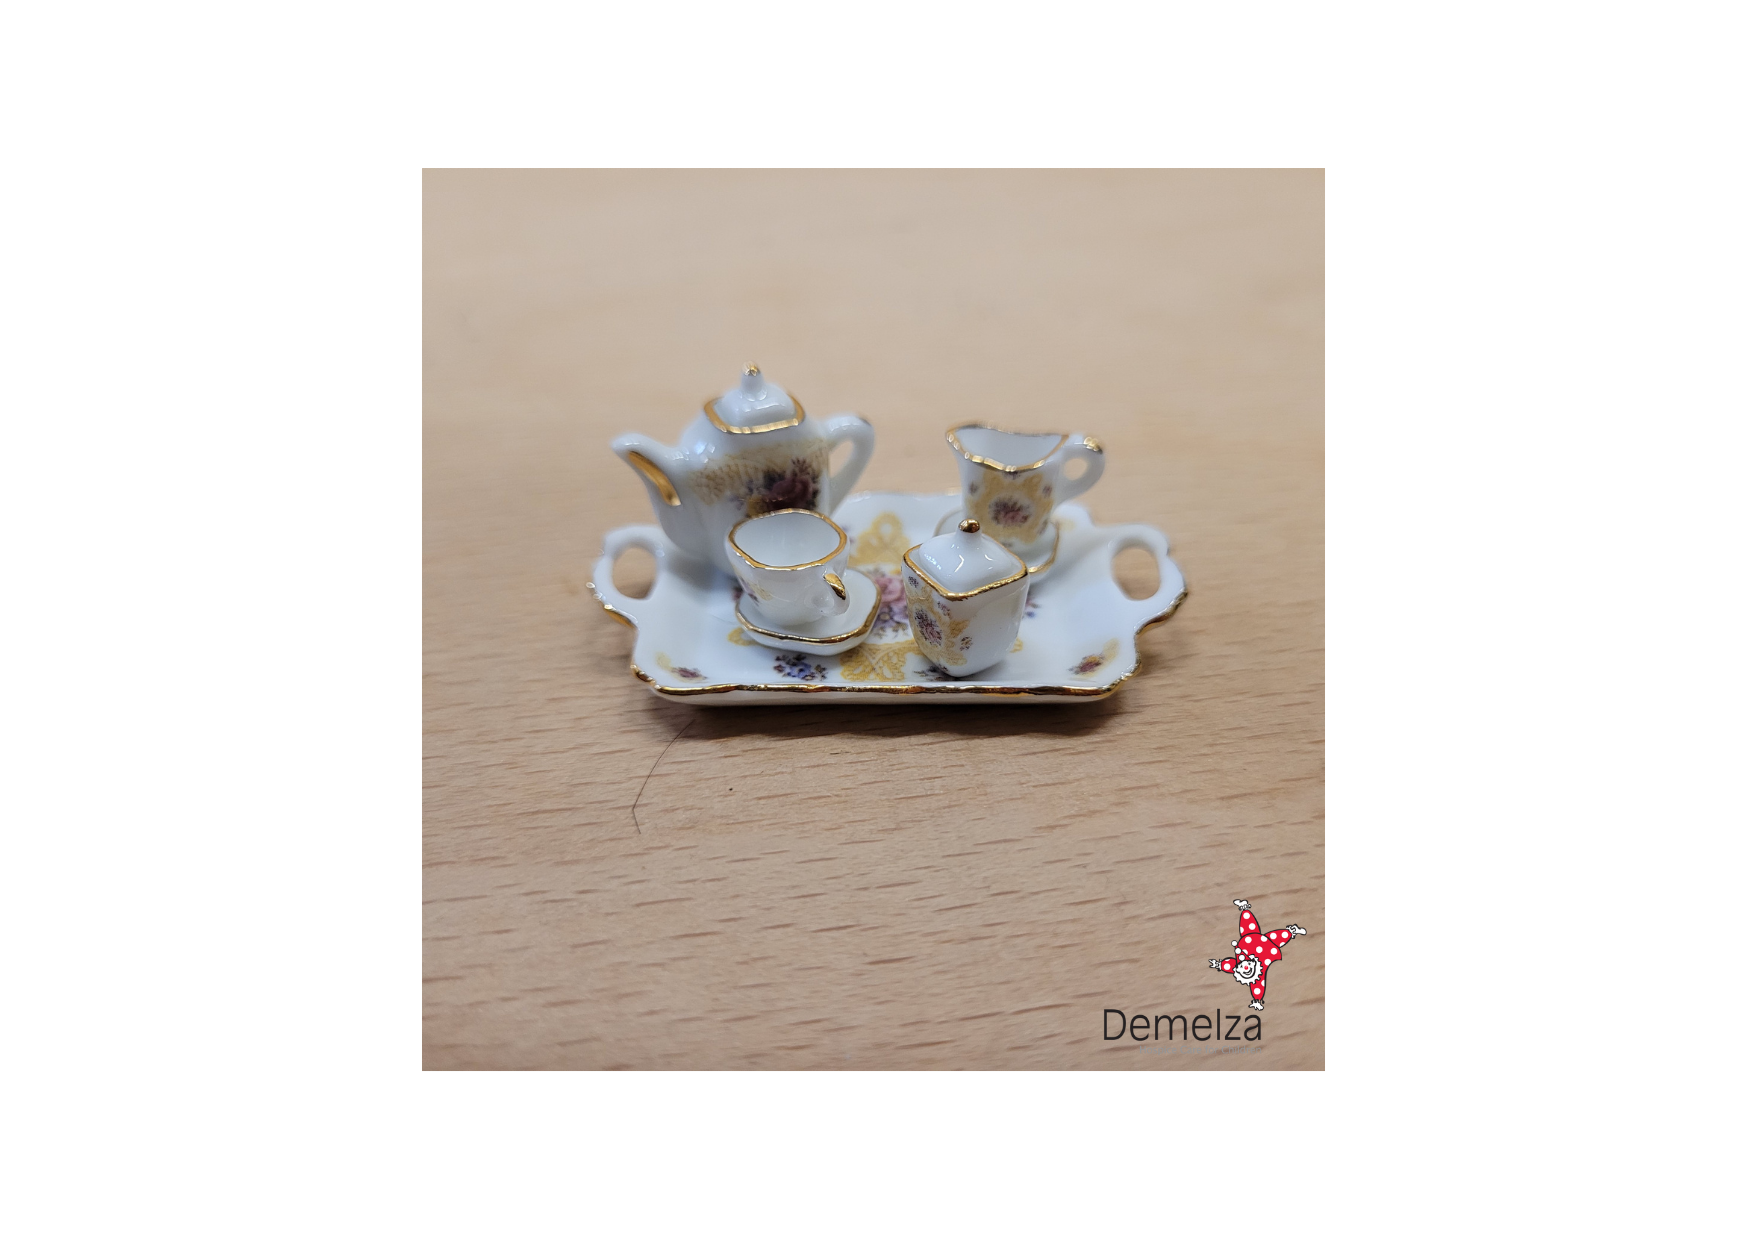 Dolls House 1:12 Scale Petite Porcelaine Coffee Set Front View